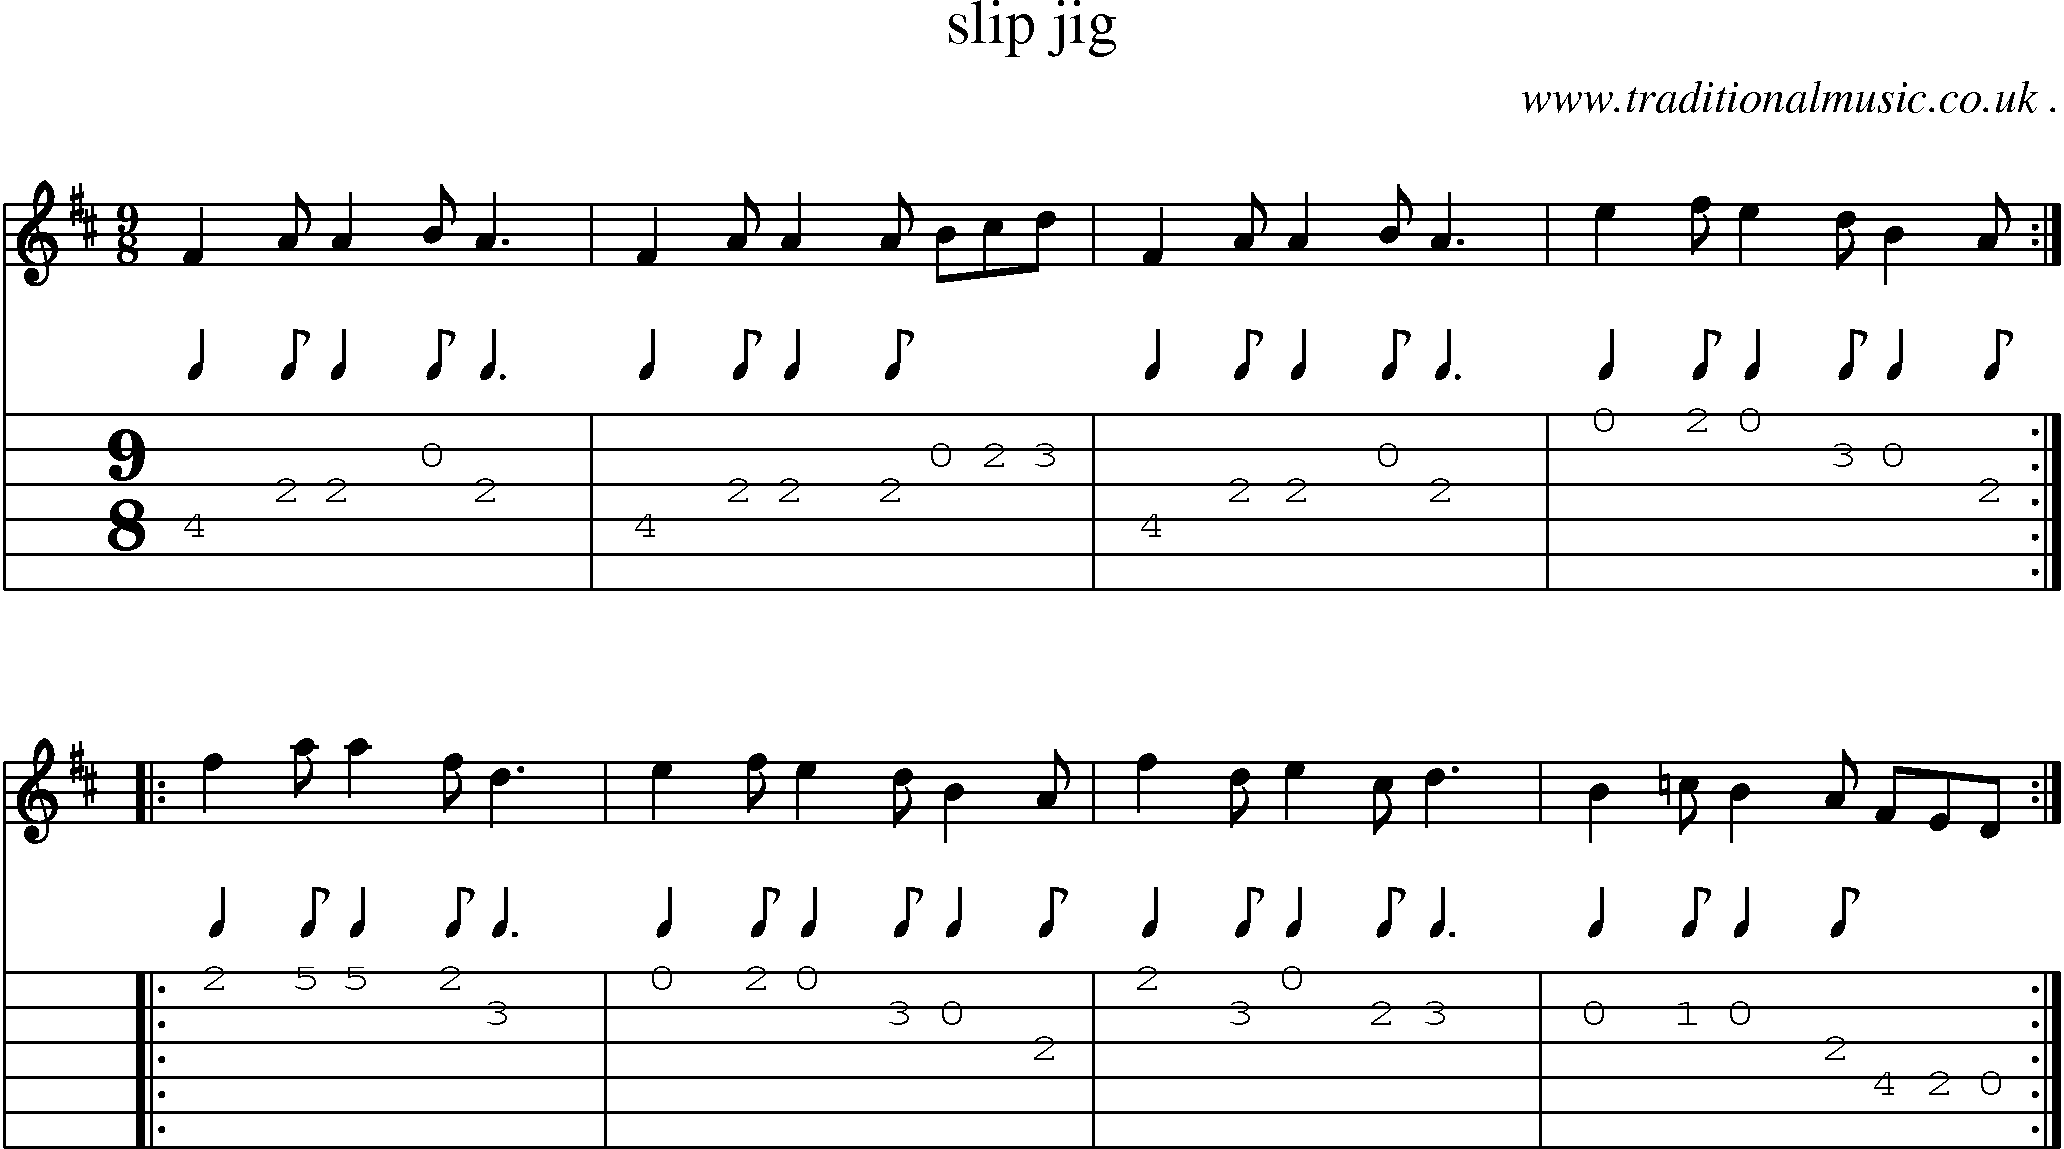 Sheet-Music and Guitar Tabs for Slip Jig